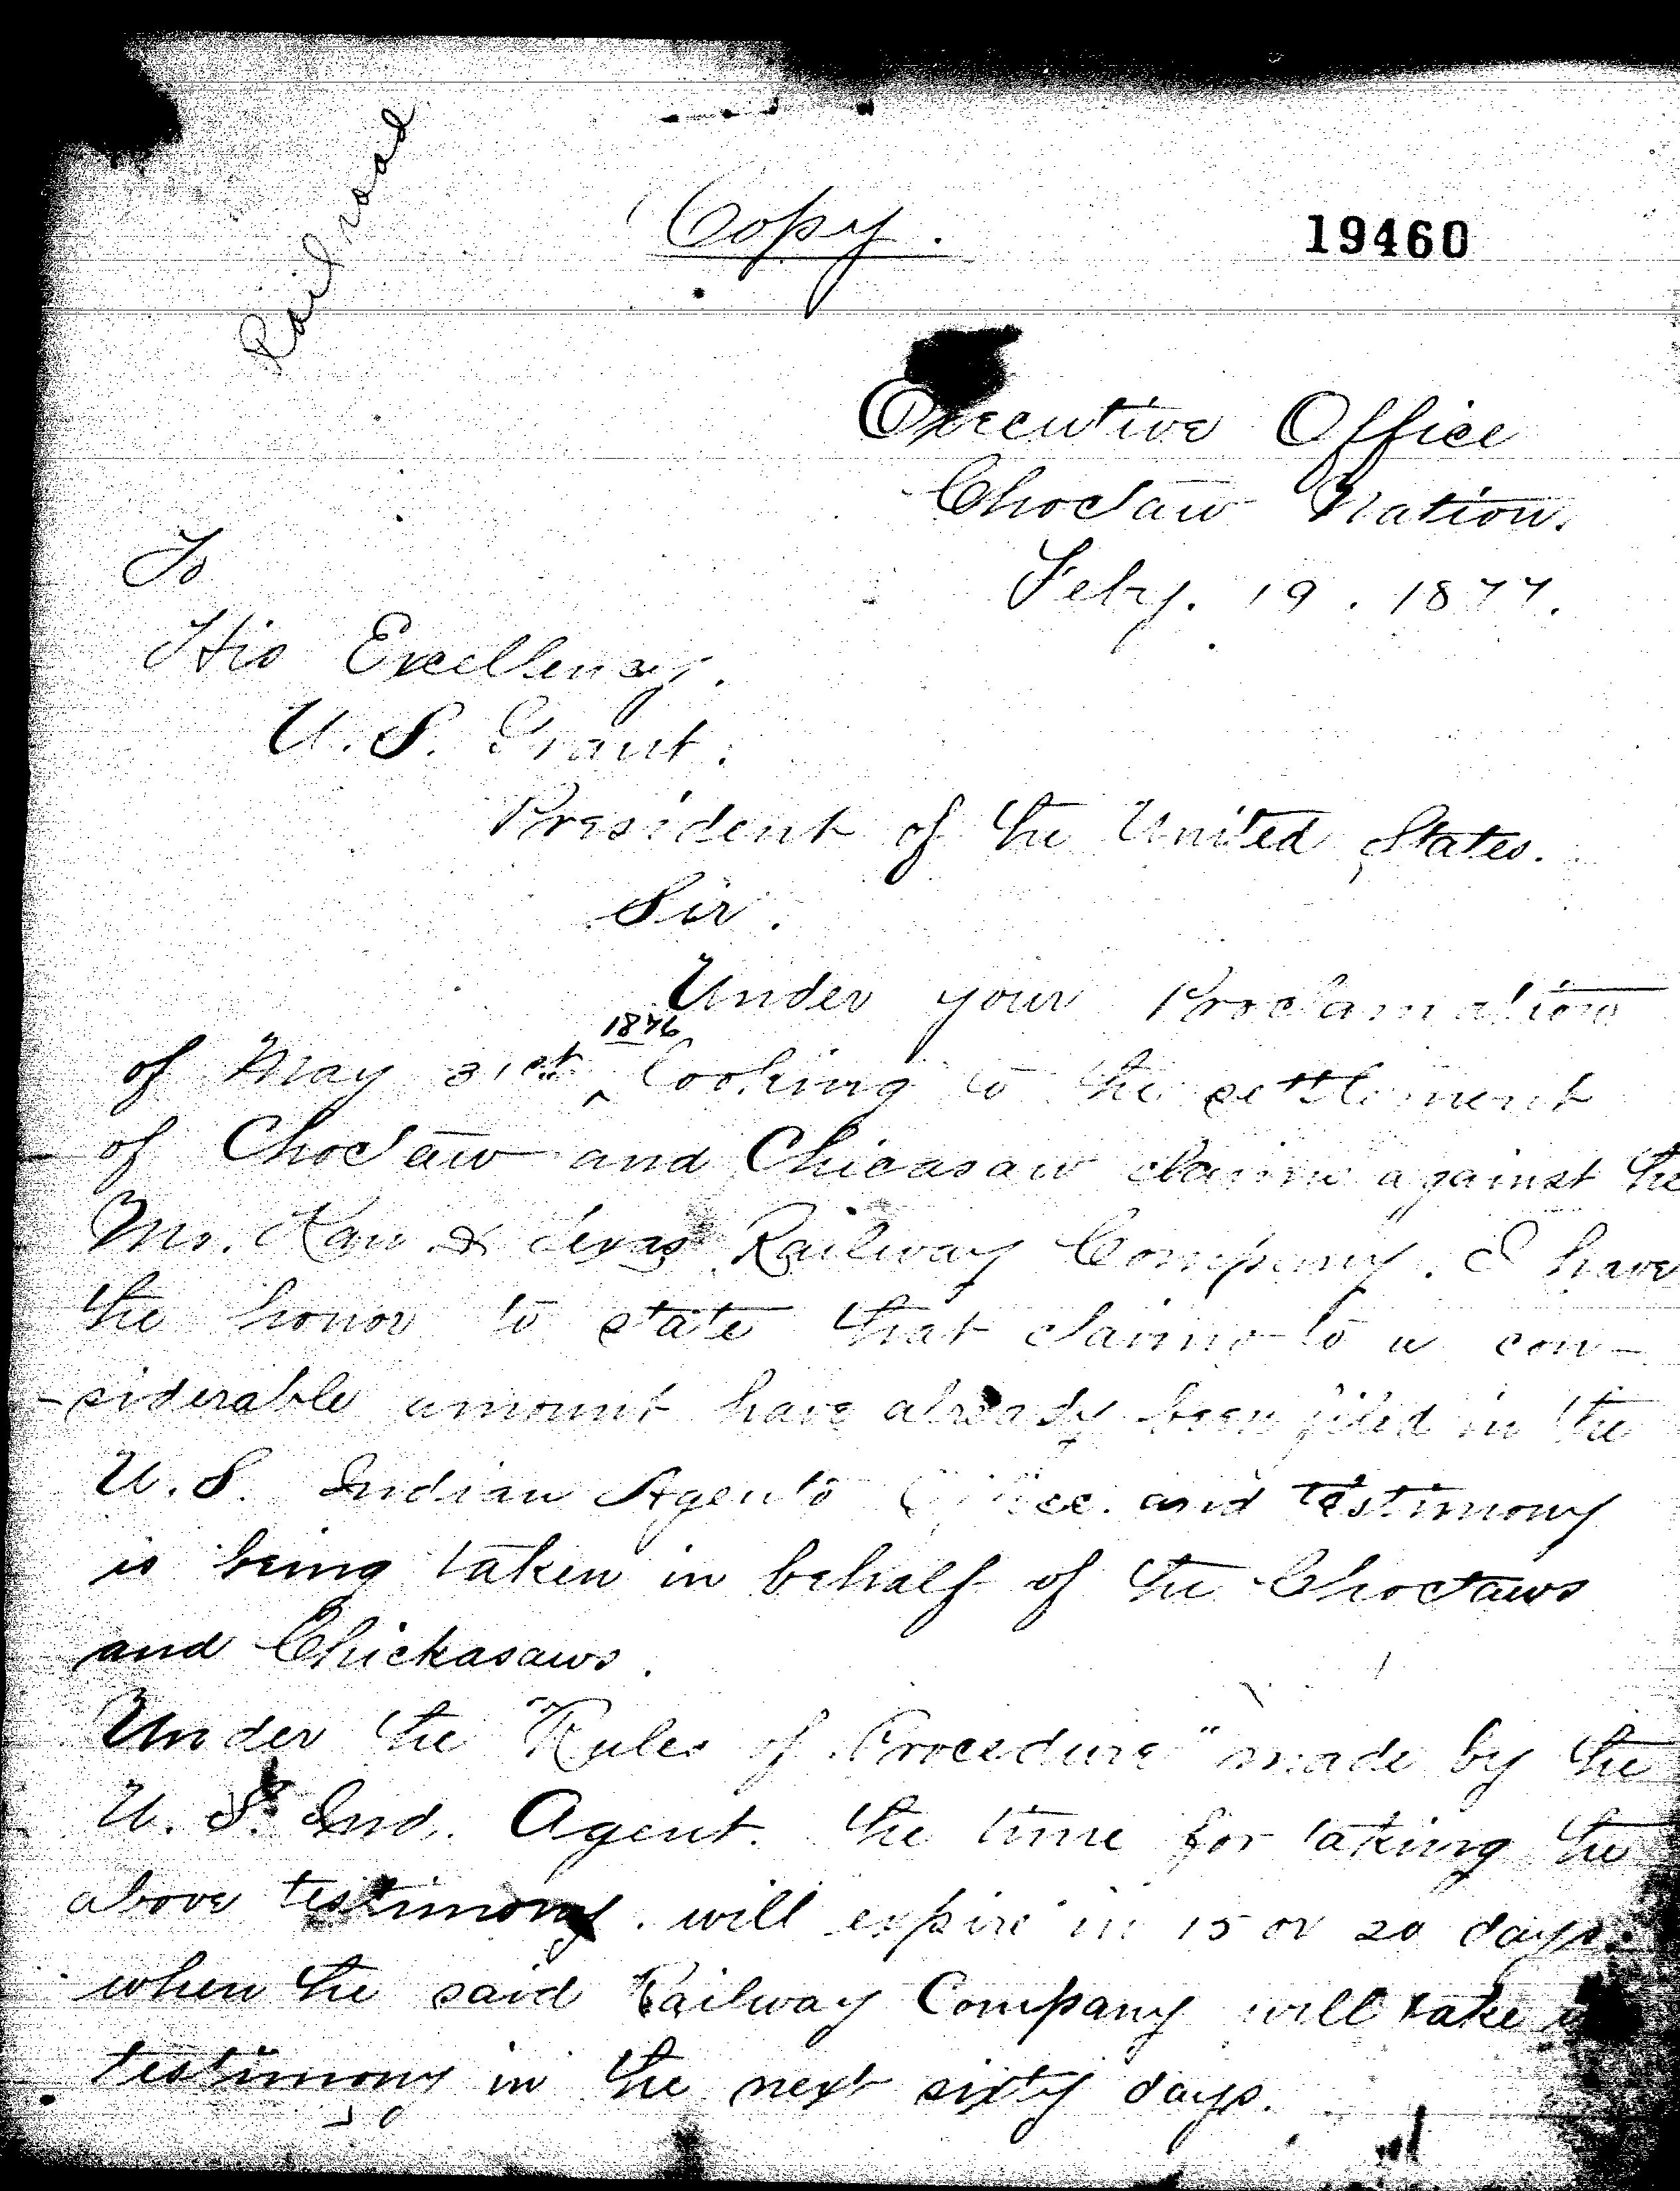 Letter to Grant